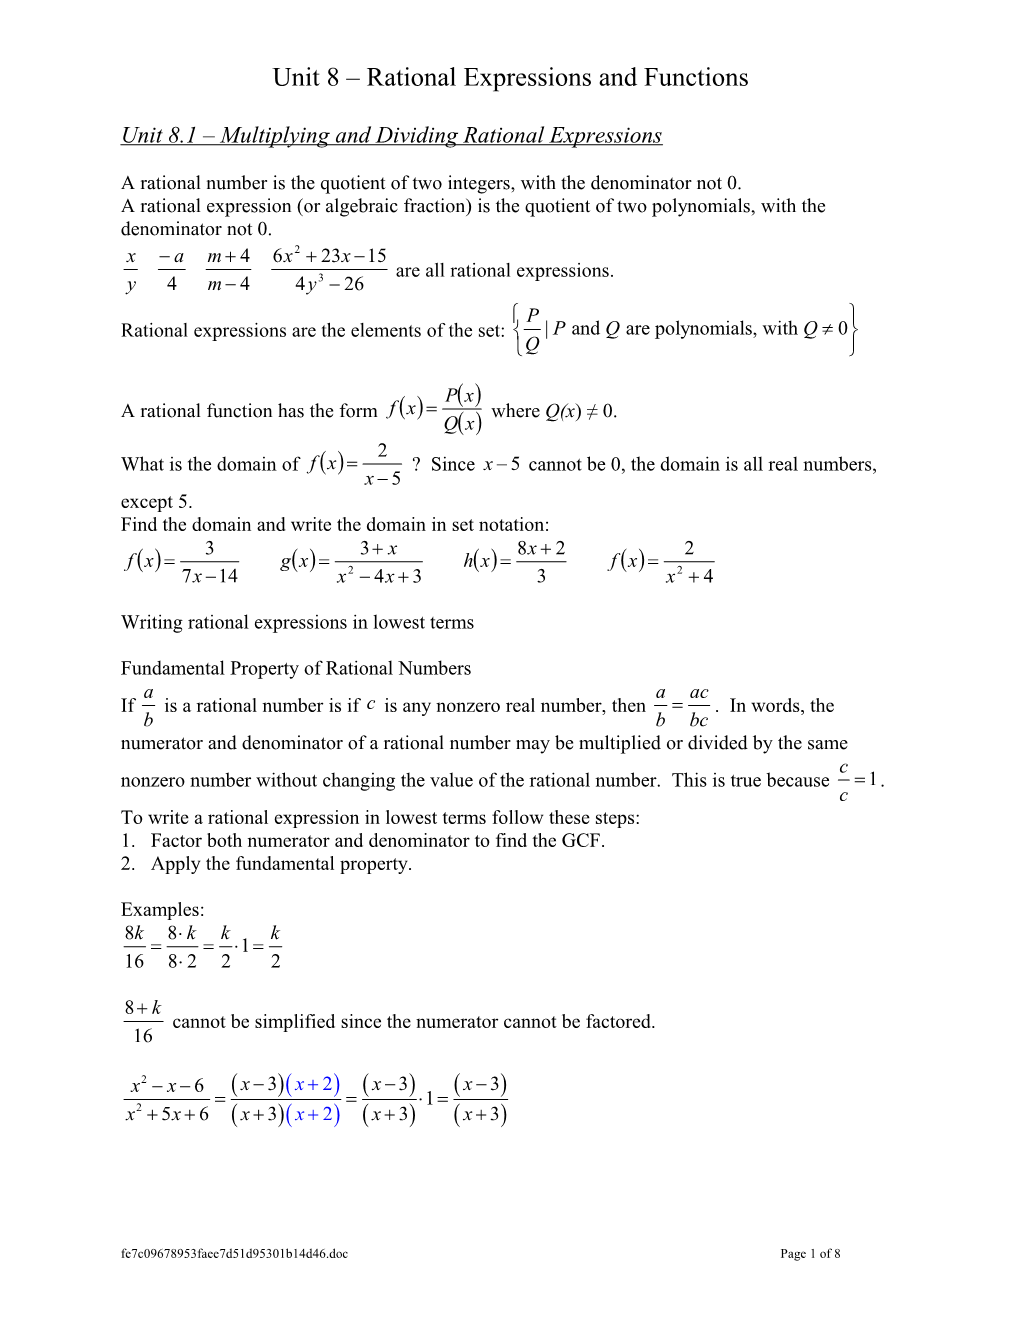 Unit 8 Rational Expressions and Functions